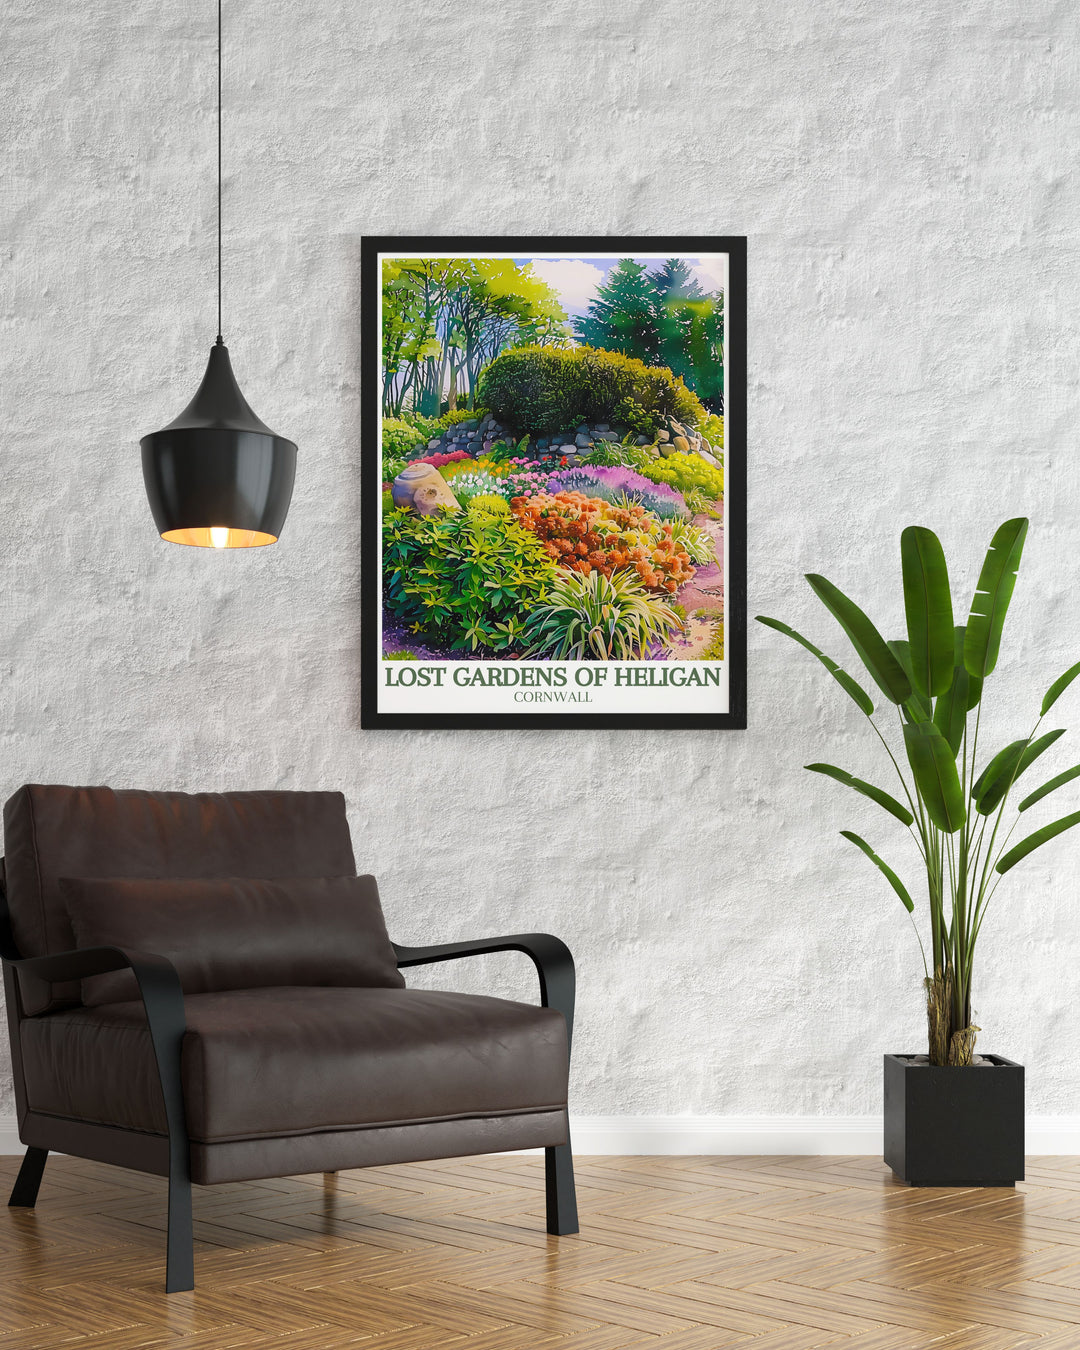 Captivating Heligan travel print and Italian garden Productive gardens artwork offering a glimpse into the rich history and lush greenery of the Lost Gardens Heligan ideal for adding a touch of botanical charm to any room